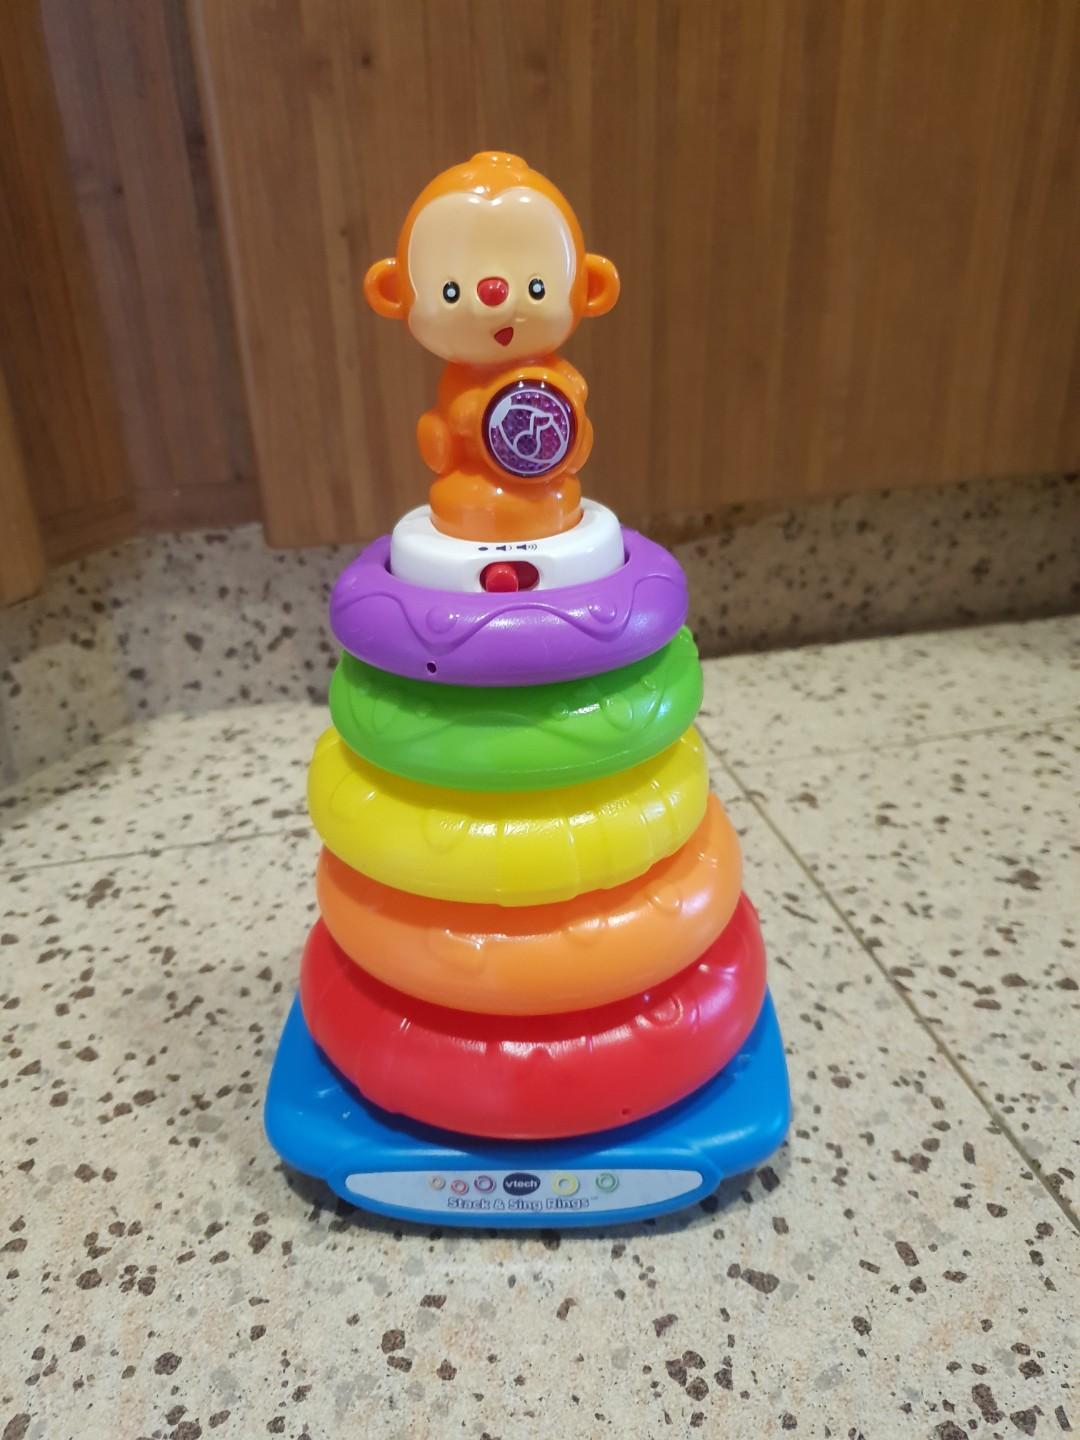 vtech stack and sing rings